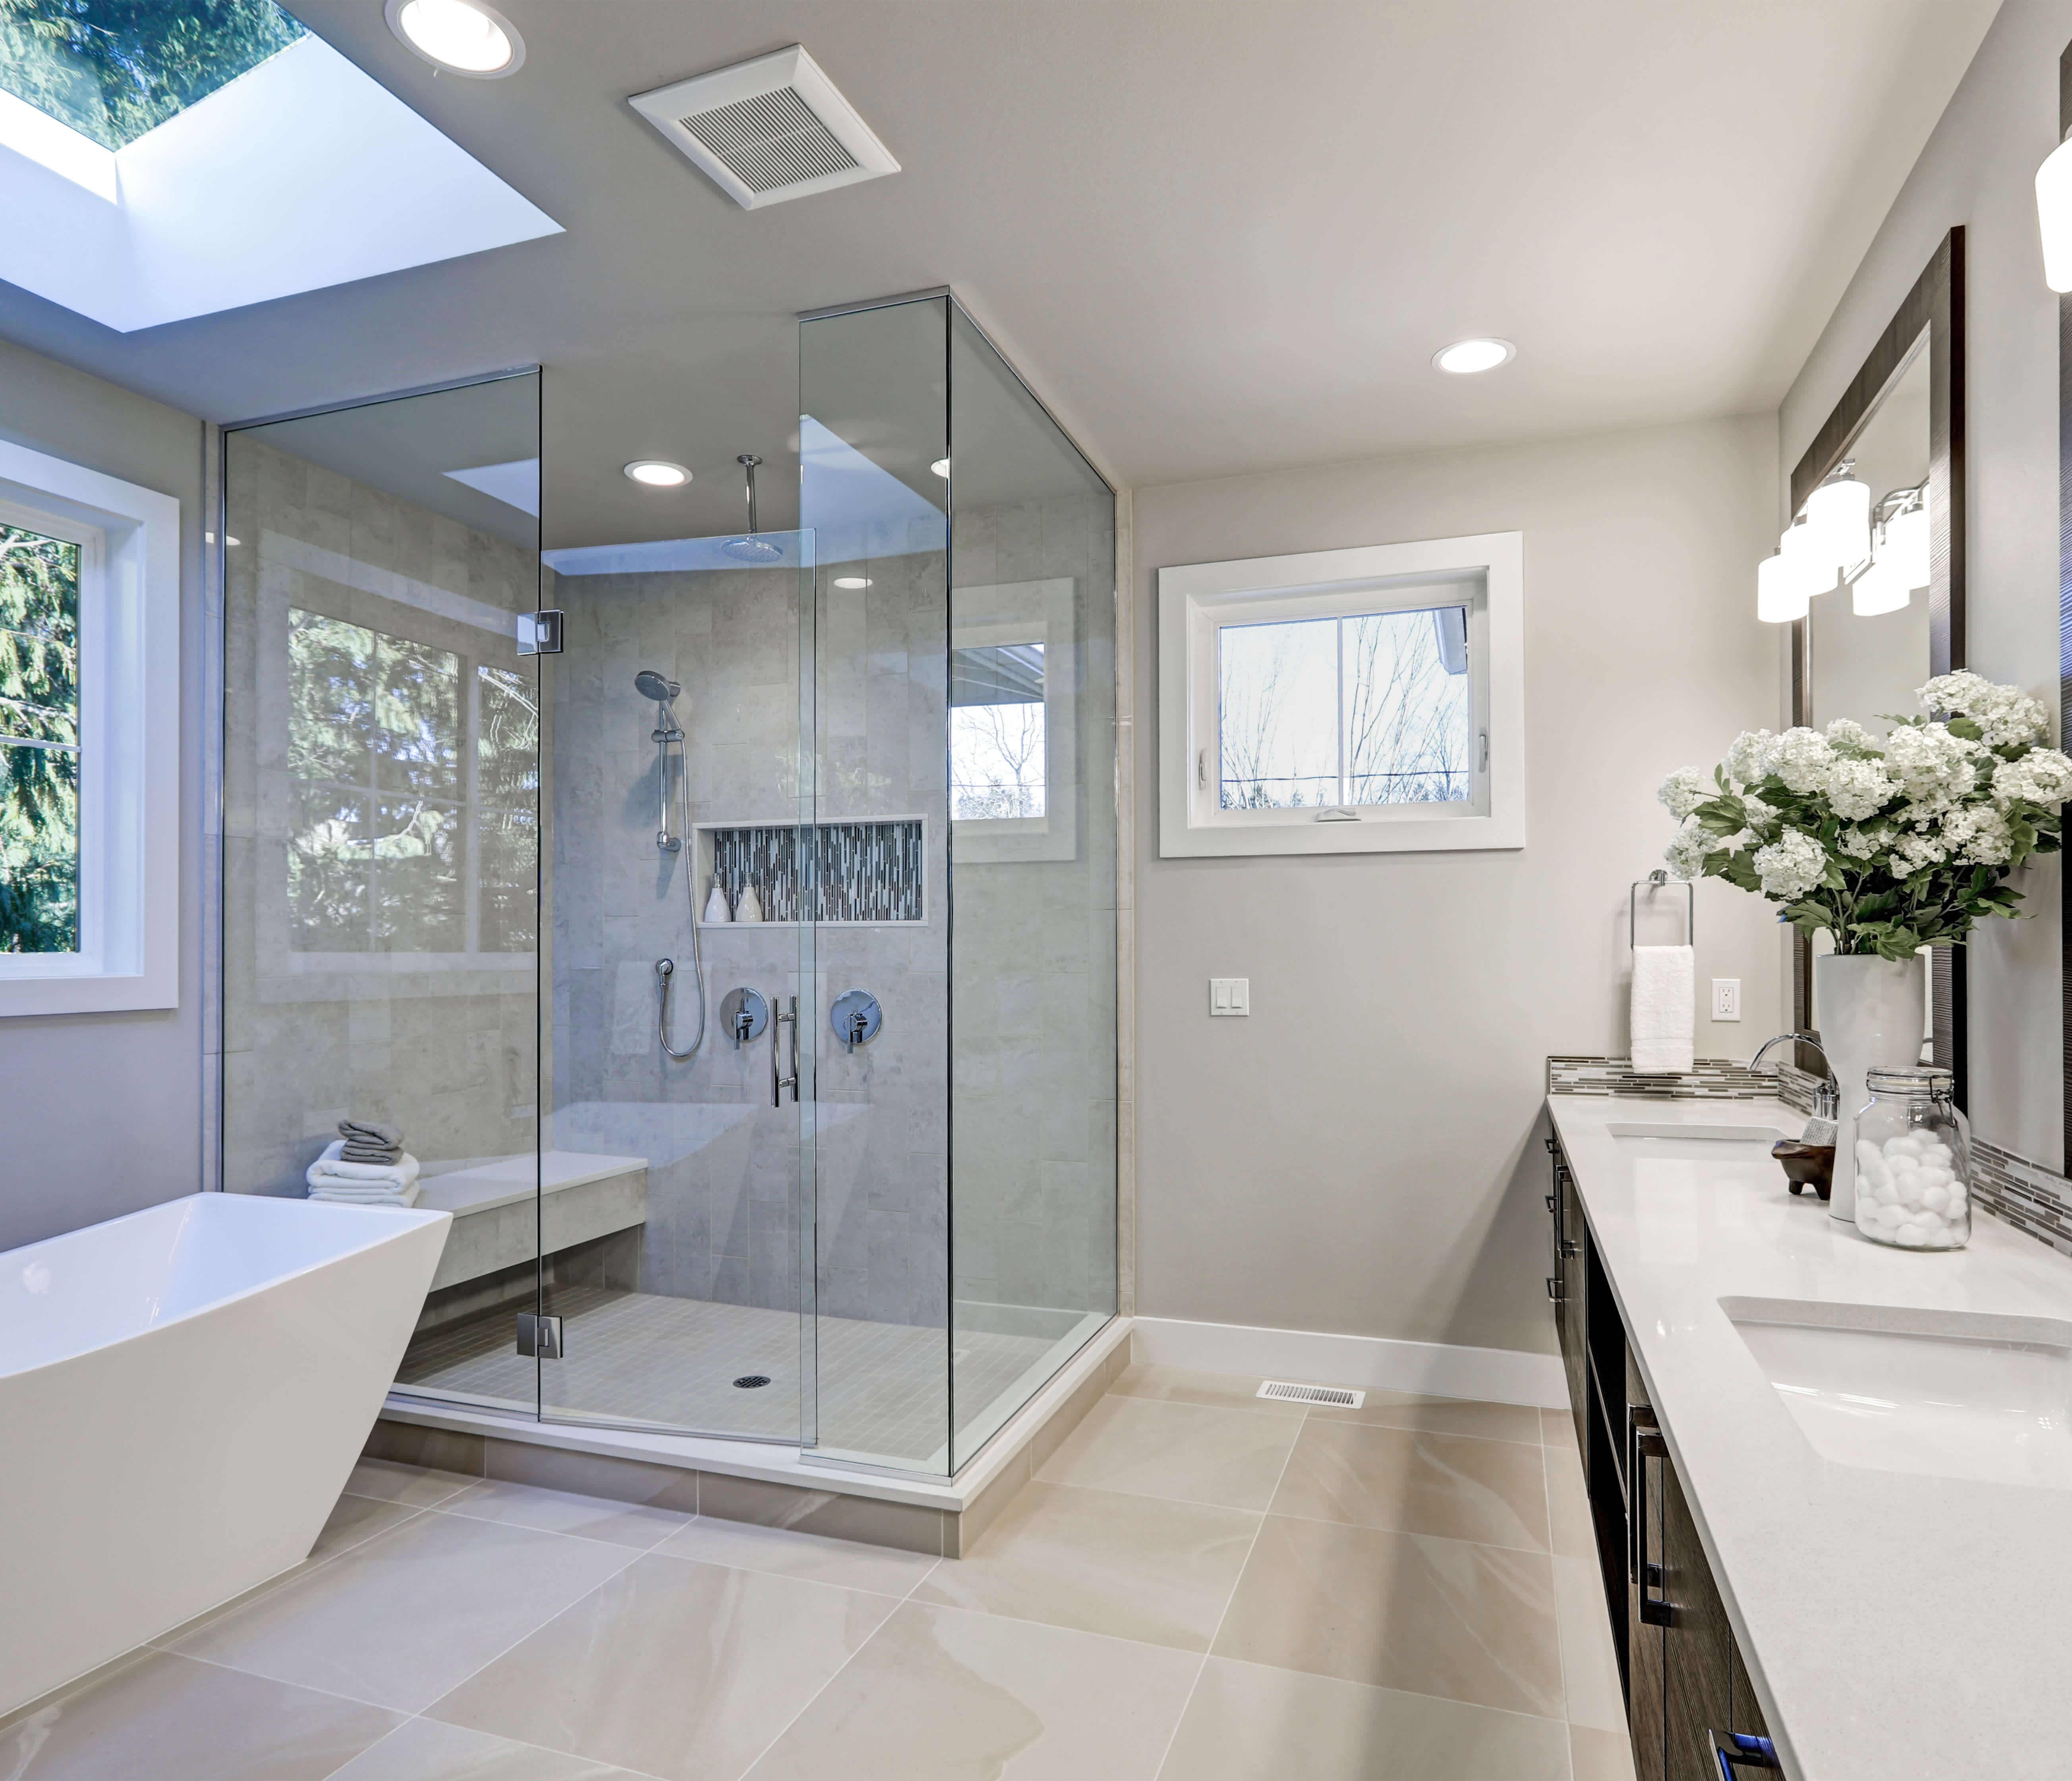 Bathroom Remodeling Considerations Promodeling Inc.